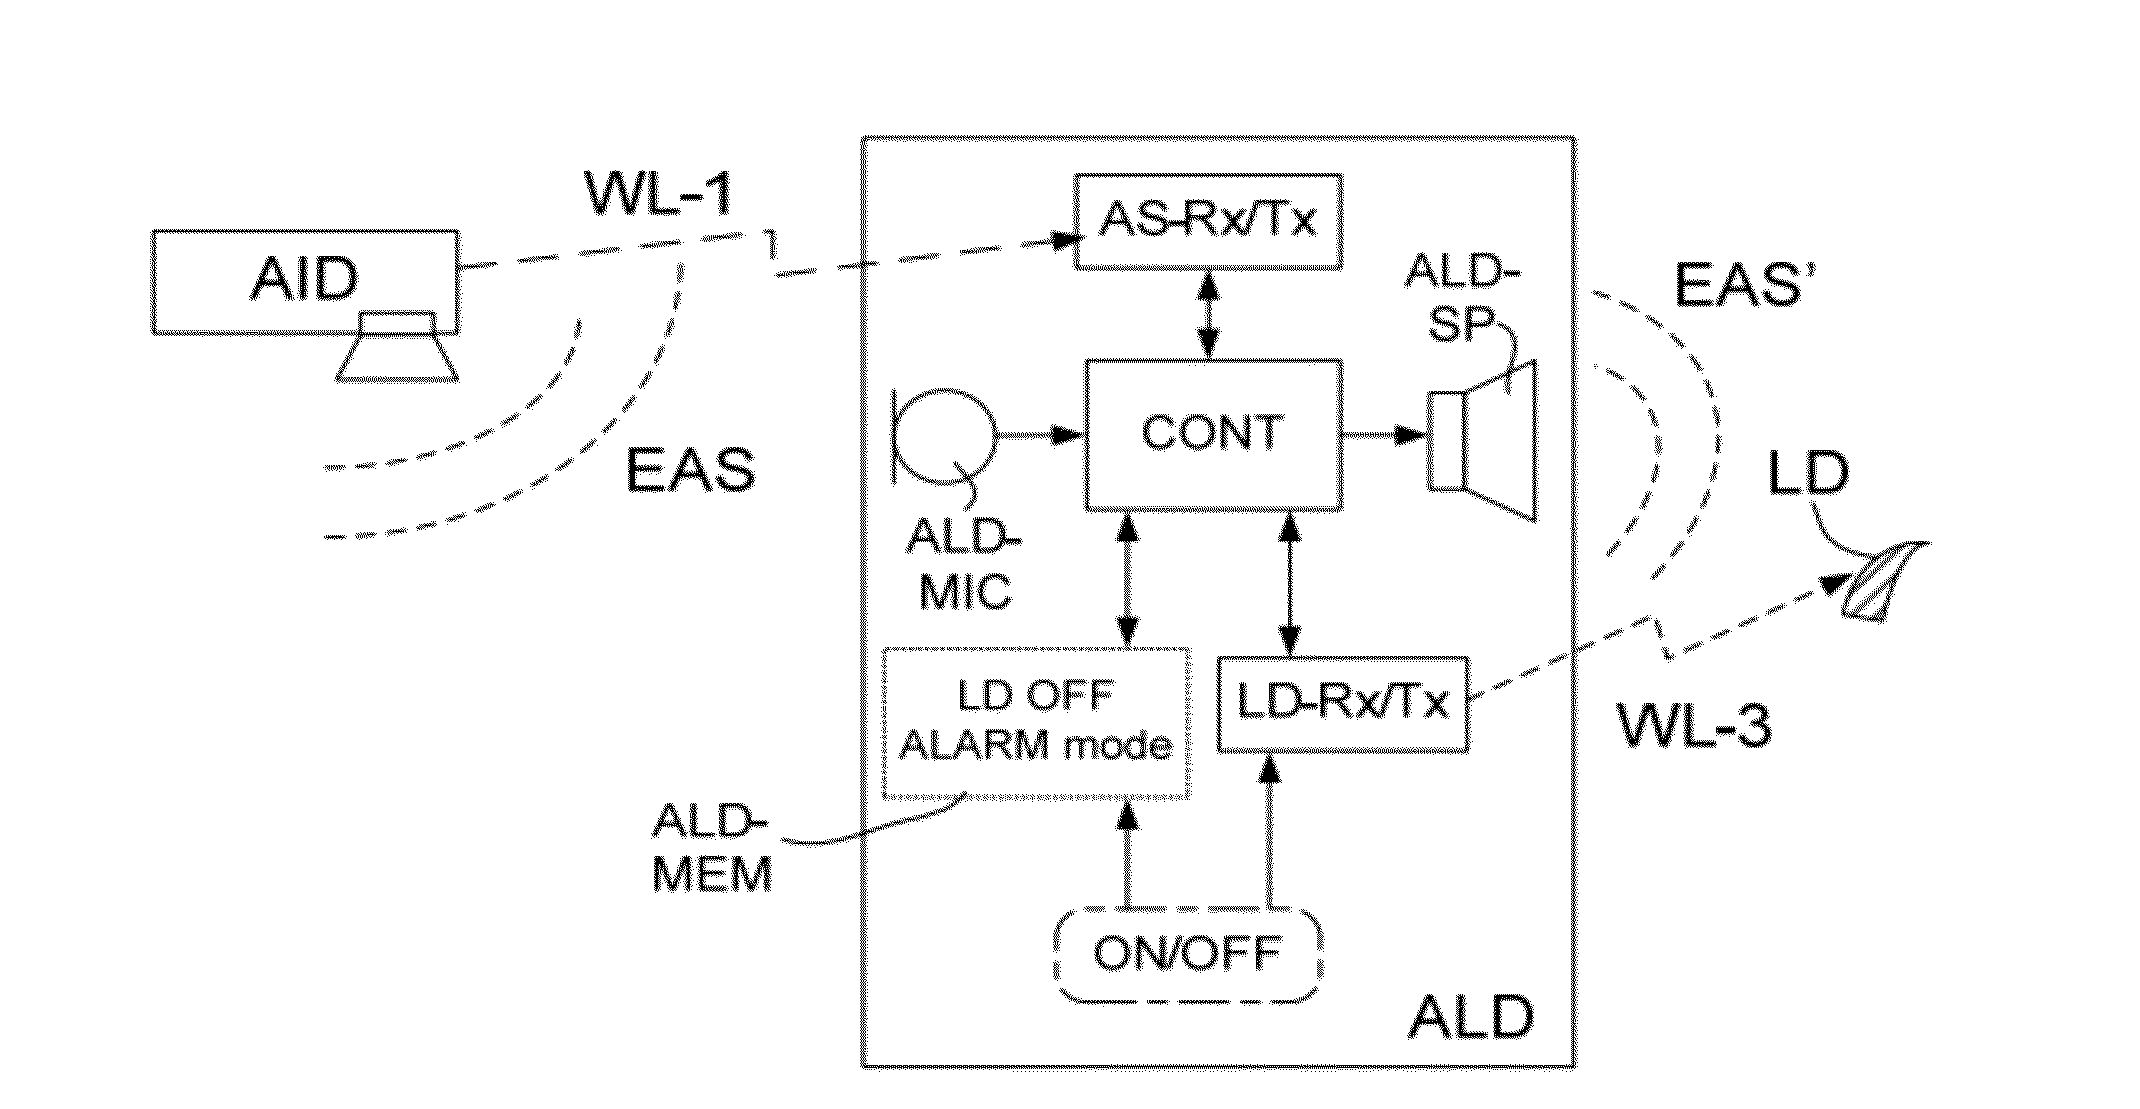  listening system comprising an alerting device and a listening device